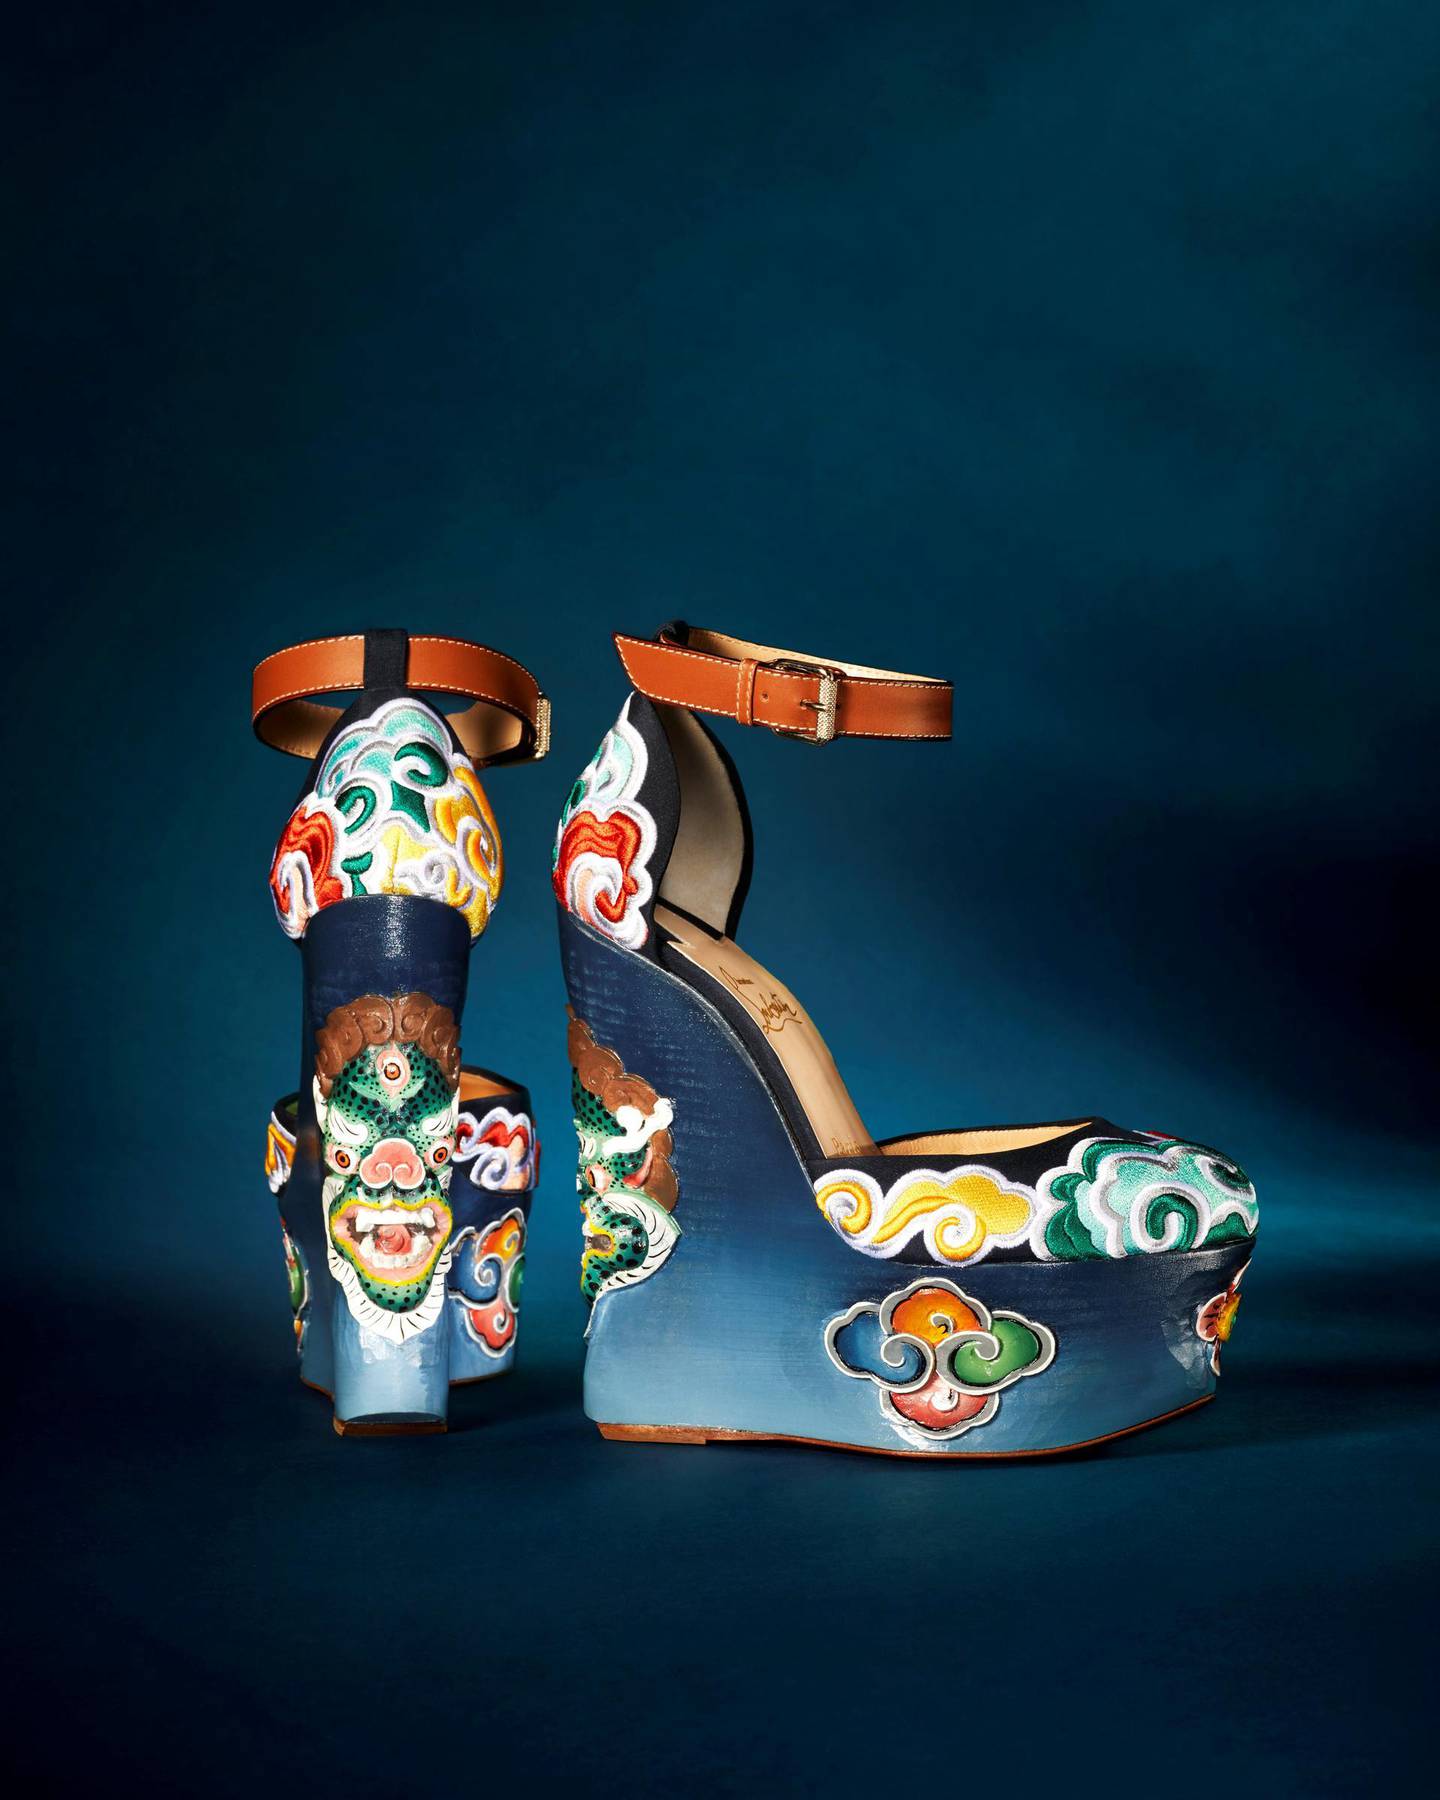 A pair of shoes from the LouBhutan collection. Courtesy Christian Louboutin